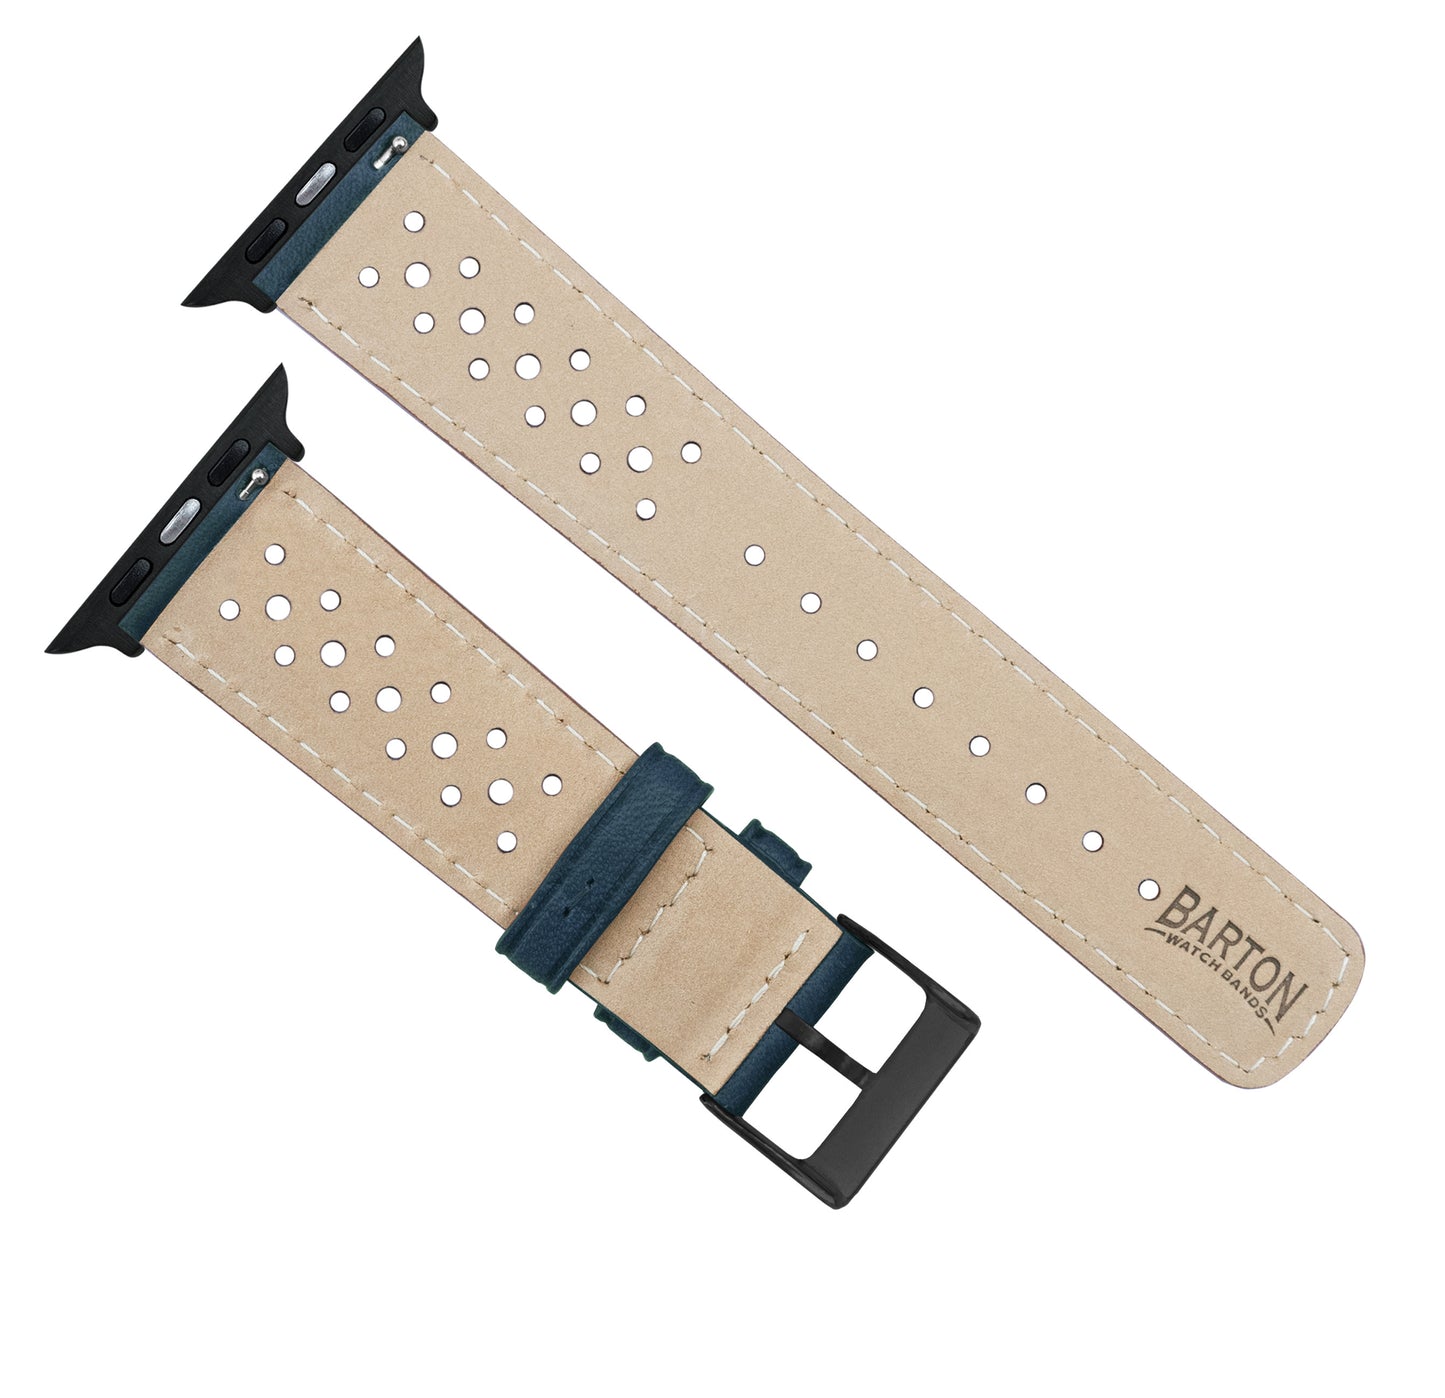 Apple Watch | Navy Blue Racing Horween Leather - Barton Watch Bands